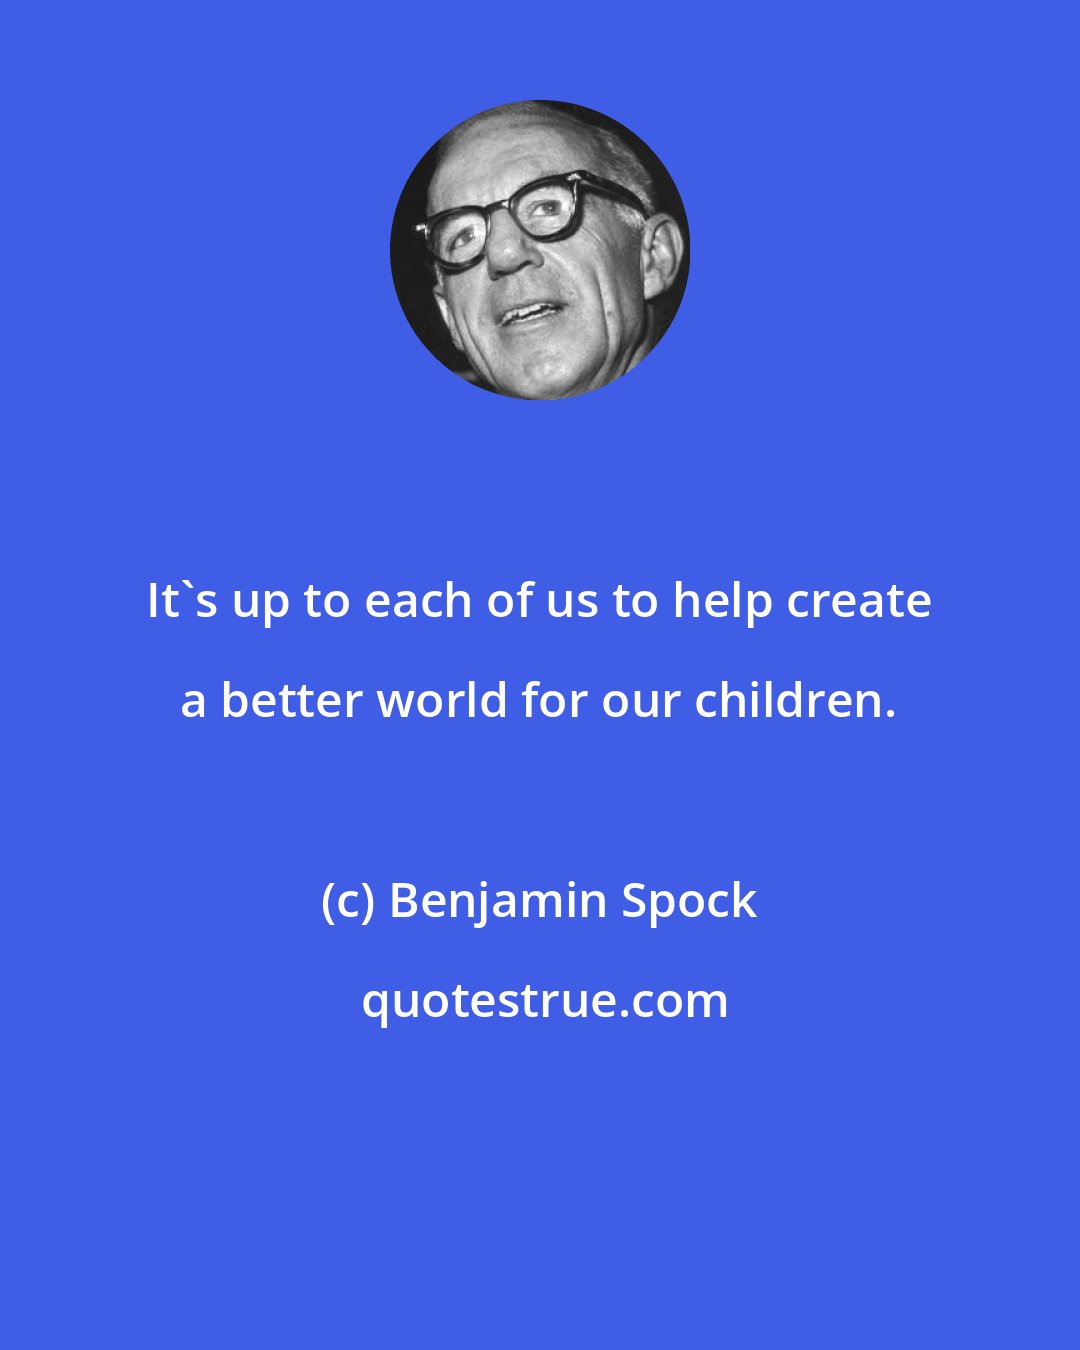 Benjamin Spock: It's up to each of us to help create a better world for our children.